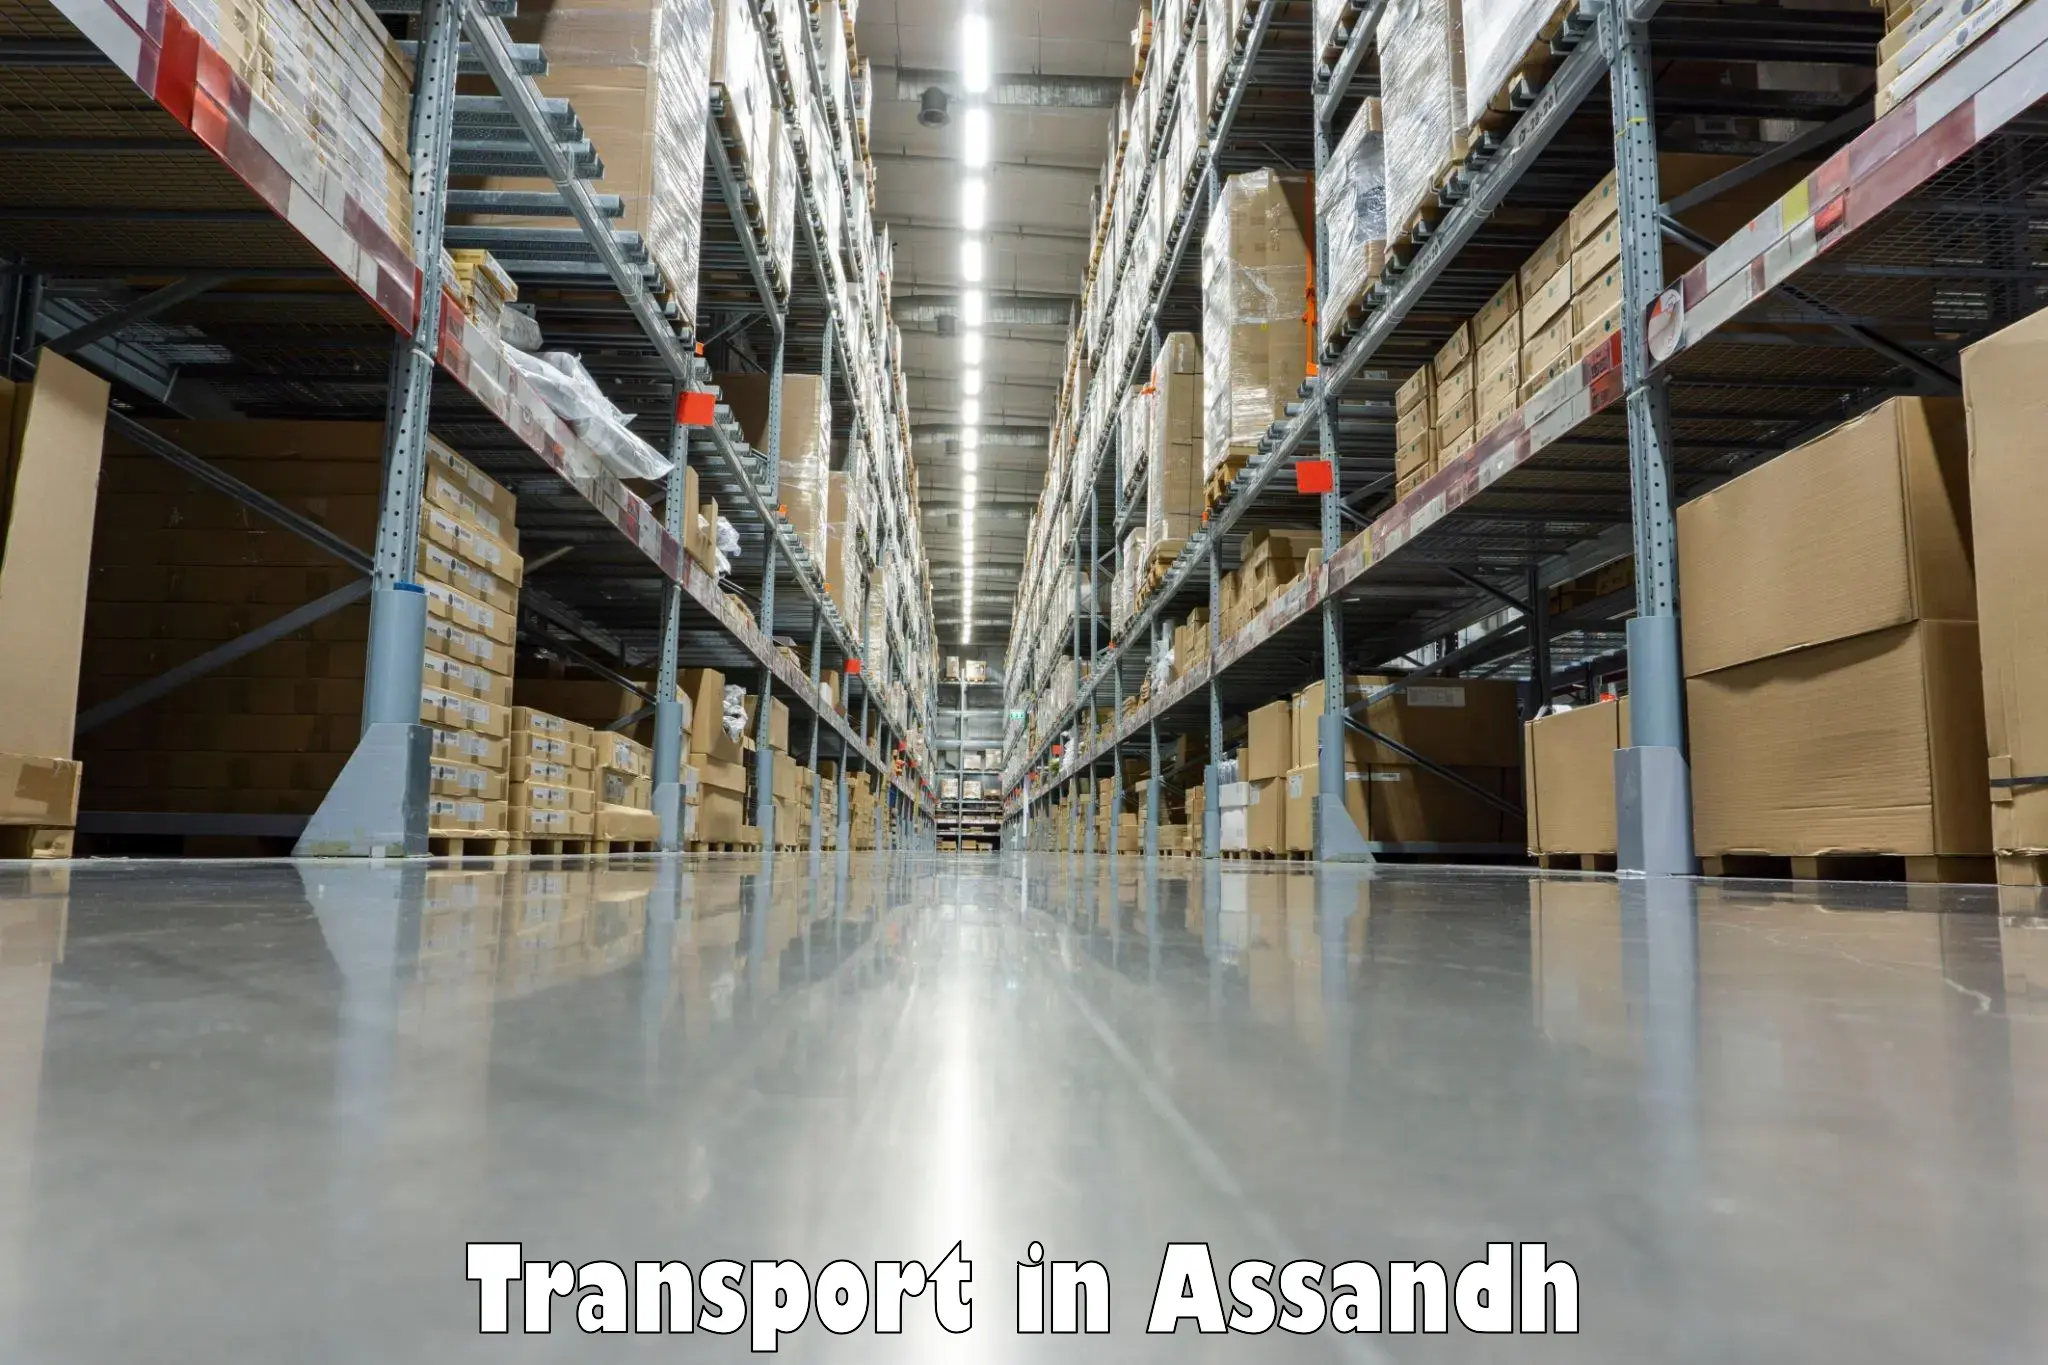 Daily transport service in Assandh